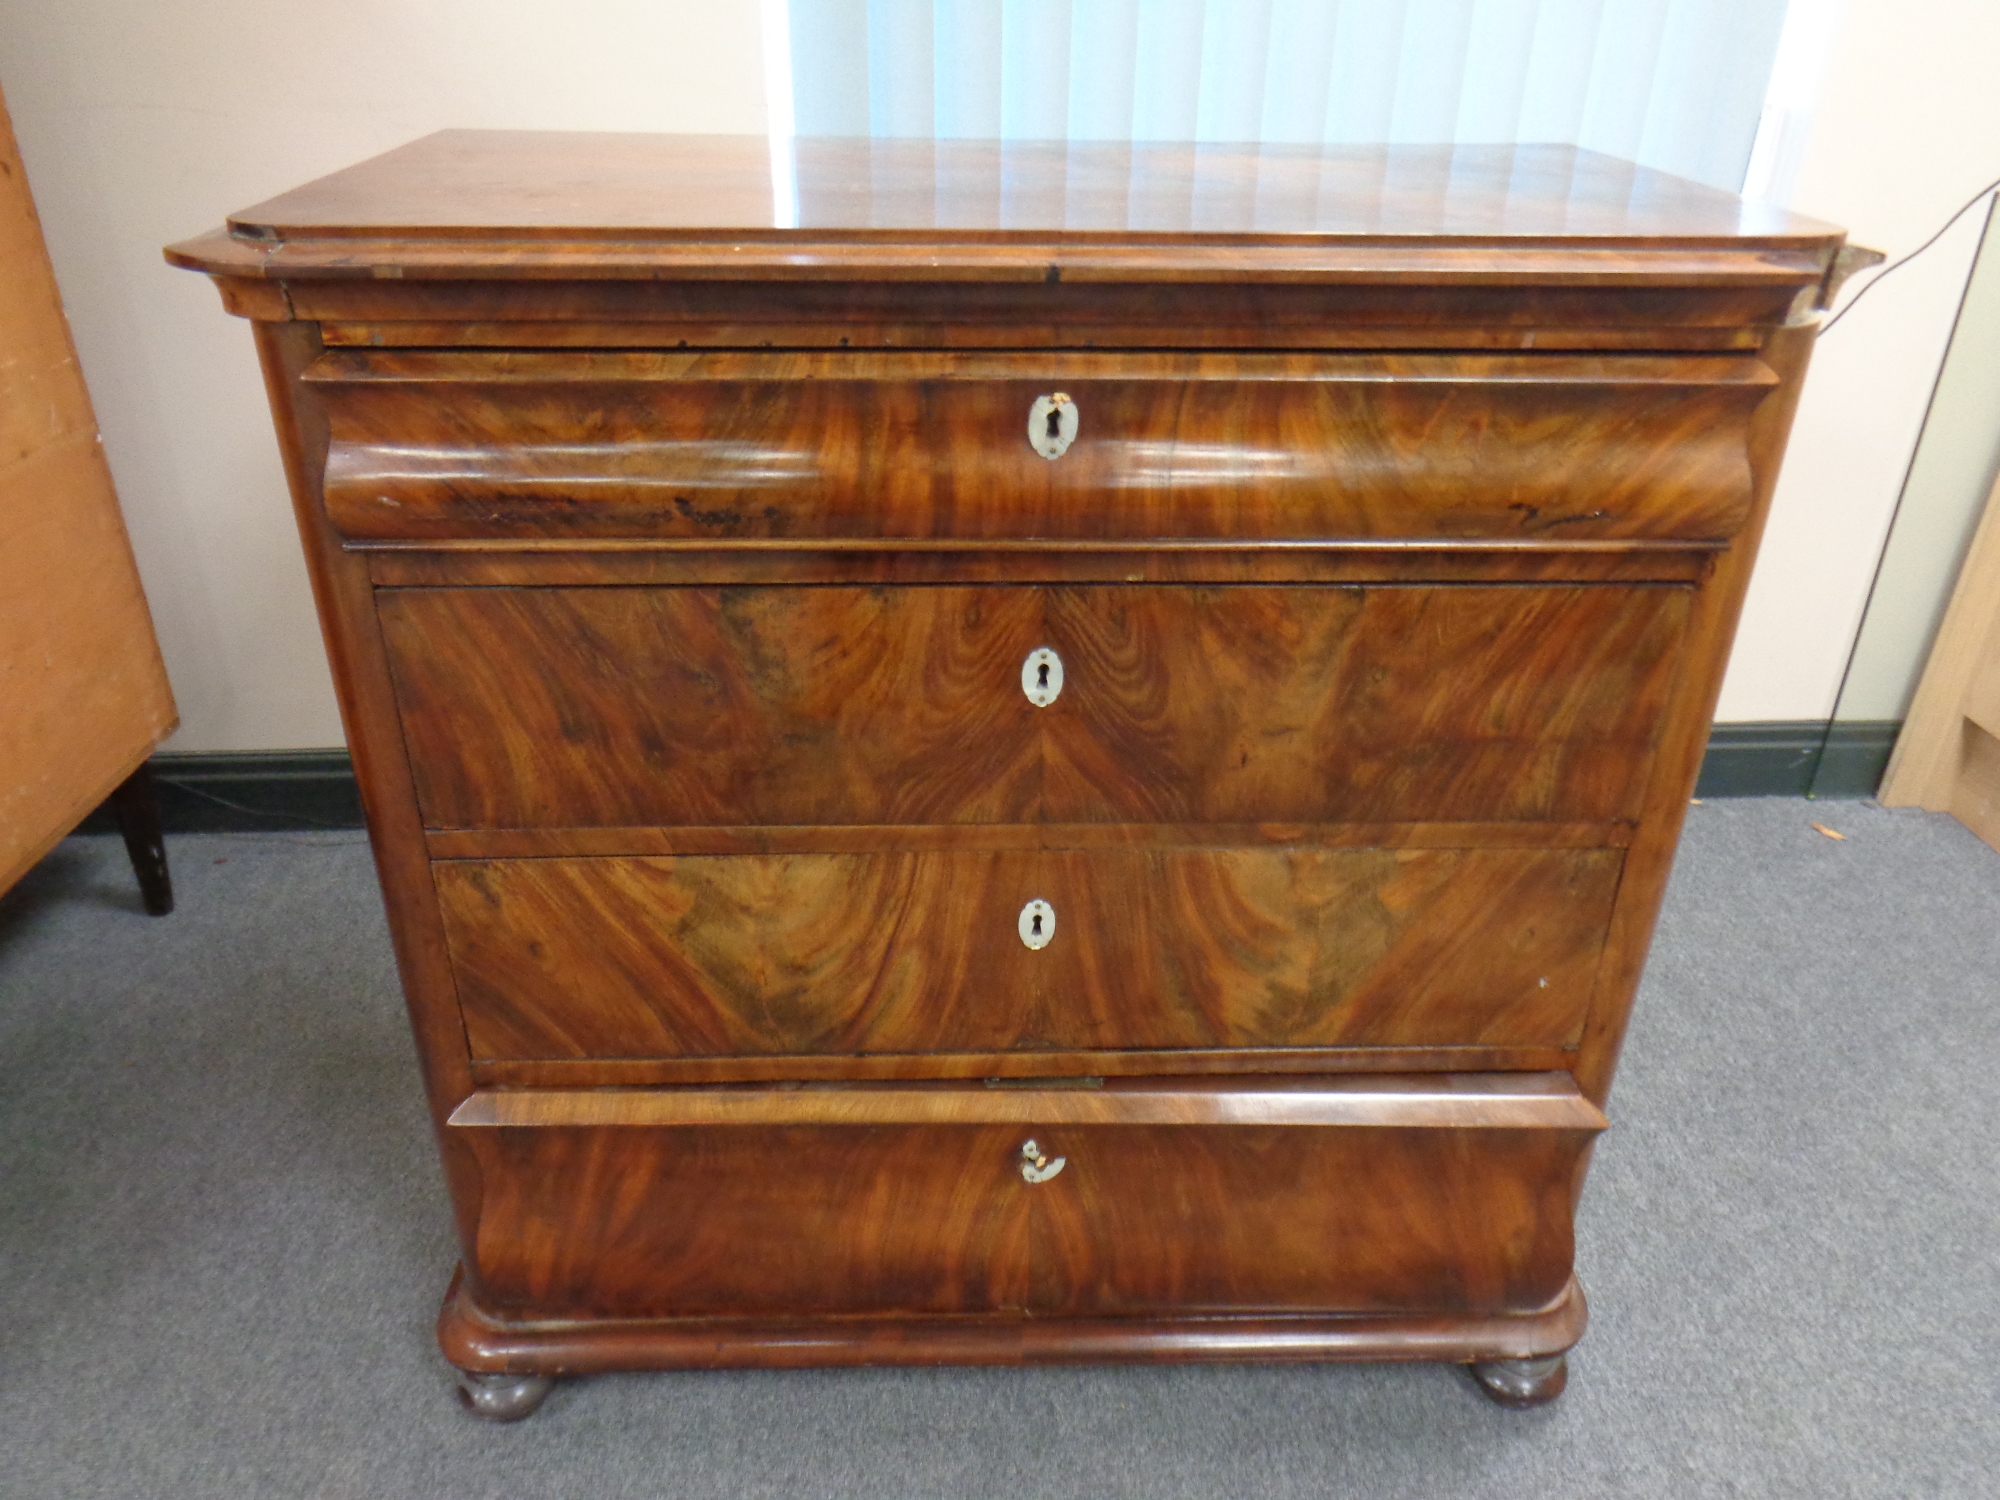 A 19th century continental walnut four drawer chest (As found)